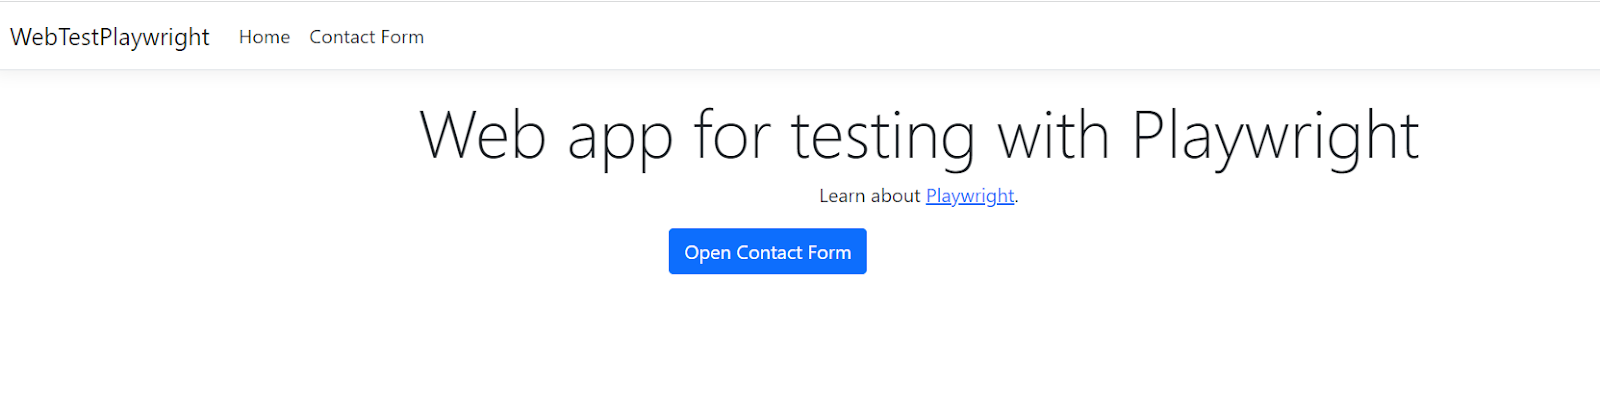 Home page of the web application to be tested with a button that opens a form on another page.